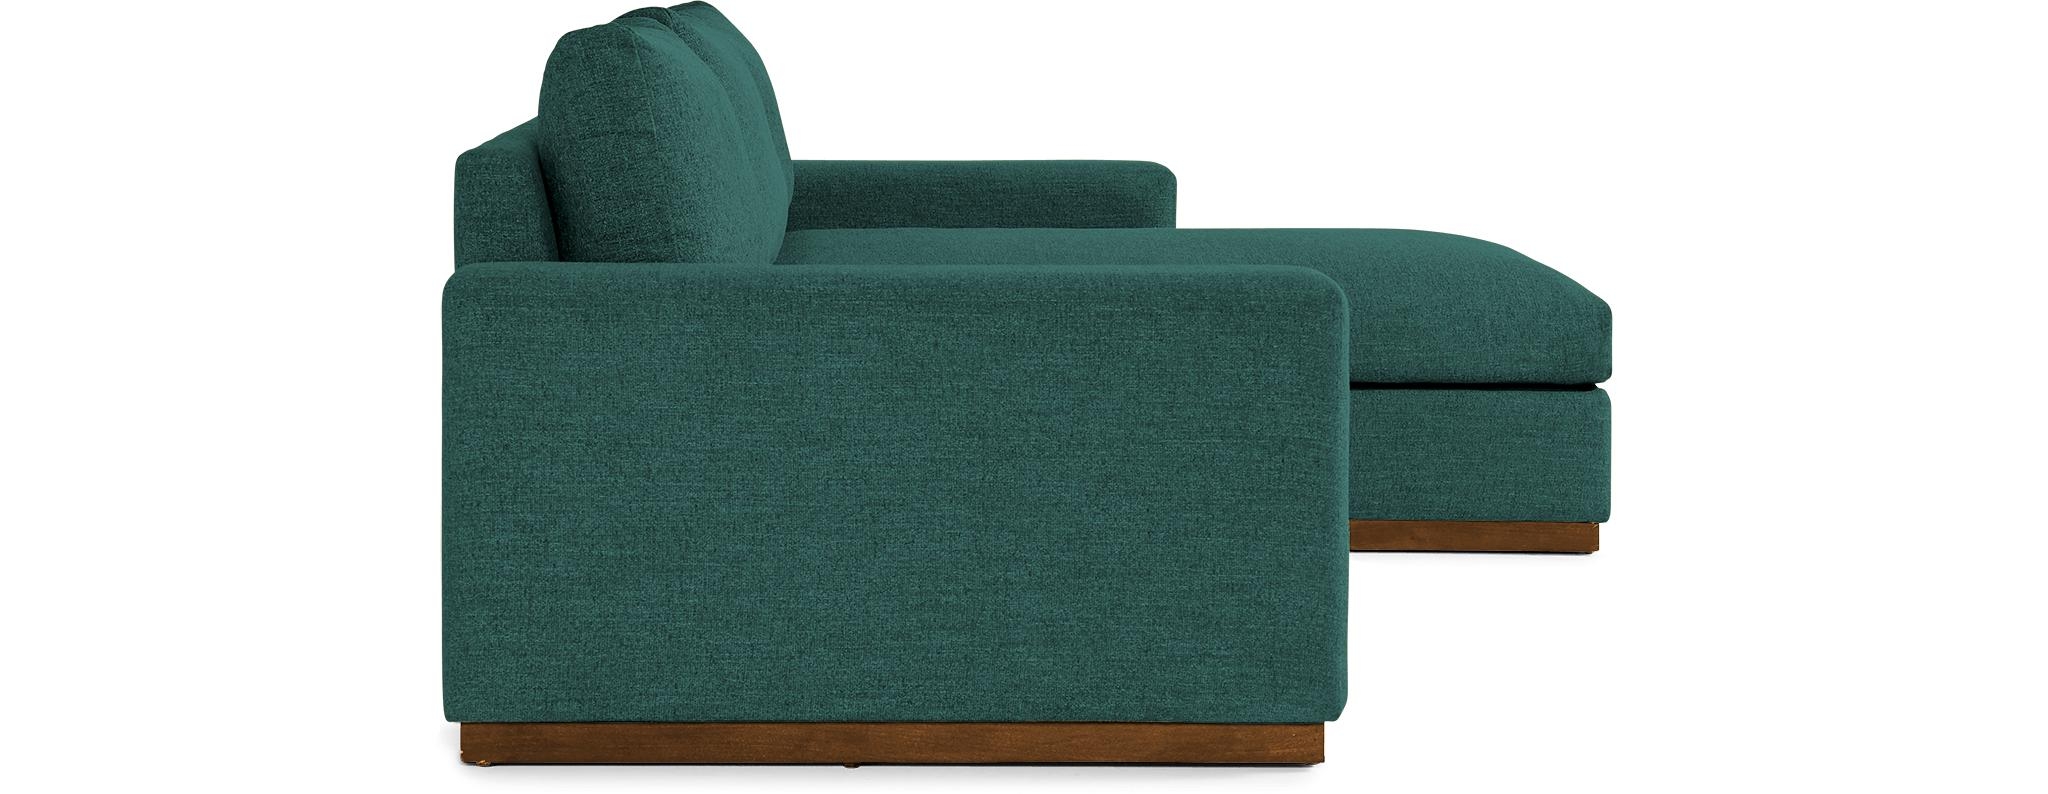 Blue Holt Mid Century Modern Sectional with Storage - Prime Peacock - Mocha - Right - Image 2